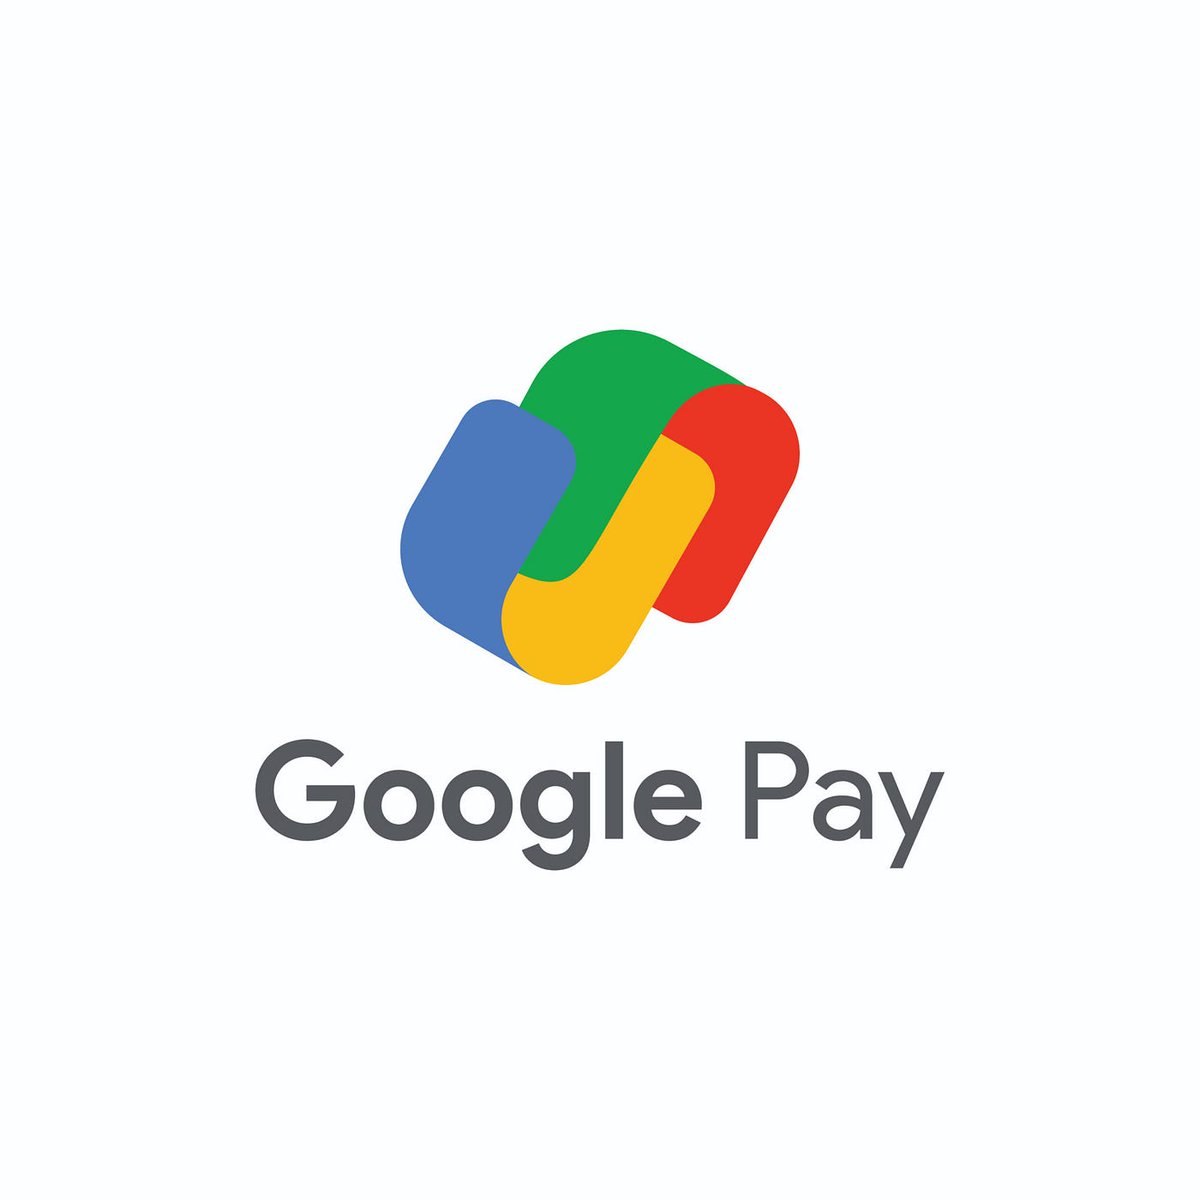 Google Pay update: 

- Shoppers can now use biometrics instead of CVV codes on Chrome/Android.

- BNPL options with Affirm & Zip are expanding across the US. Amex & Capital One cardholders will see select benefits in autofill dropdowns.

#GooglePay #Fintech #BNPL #DigitalPayments